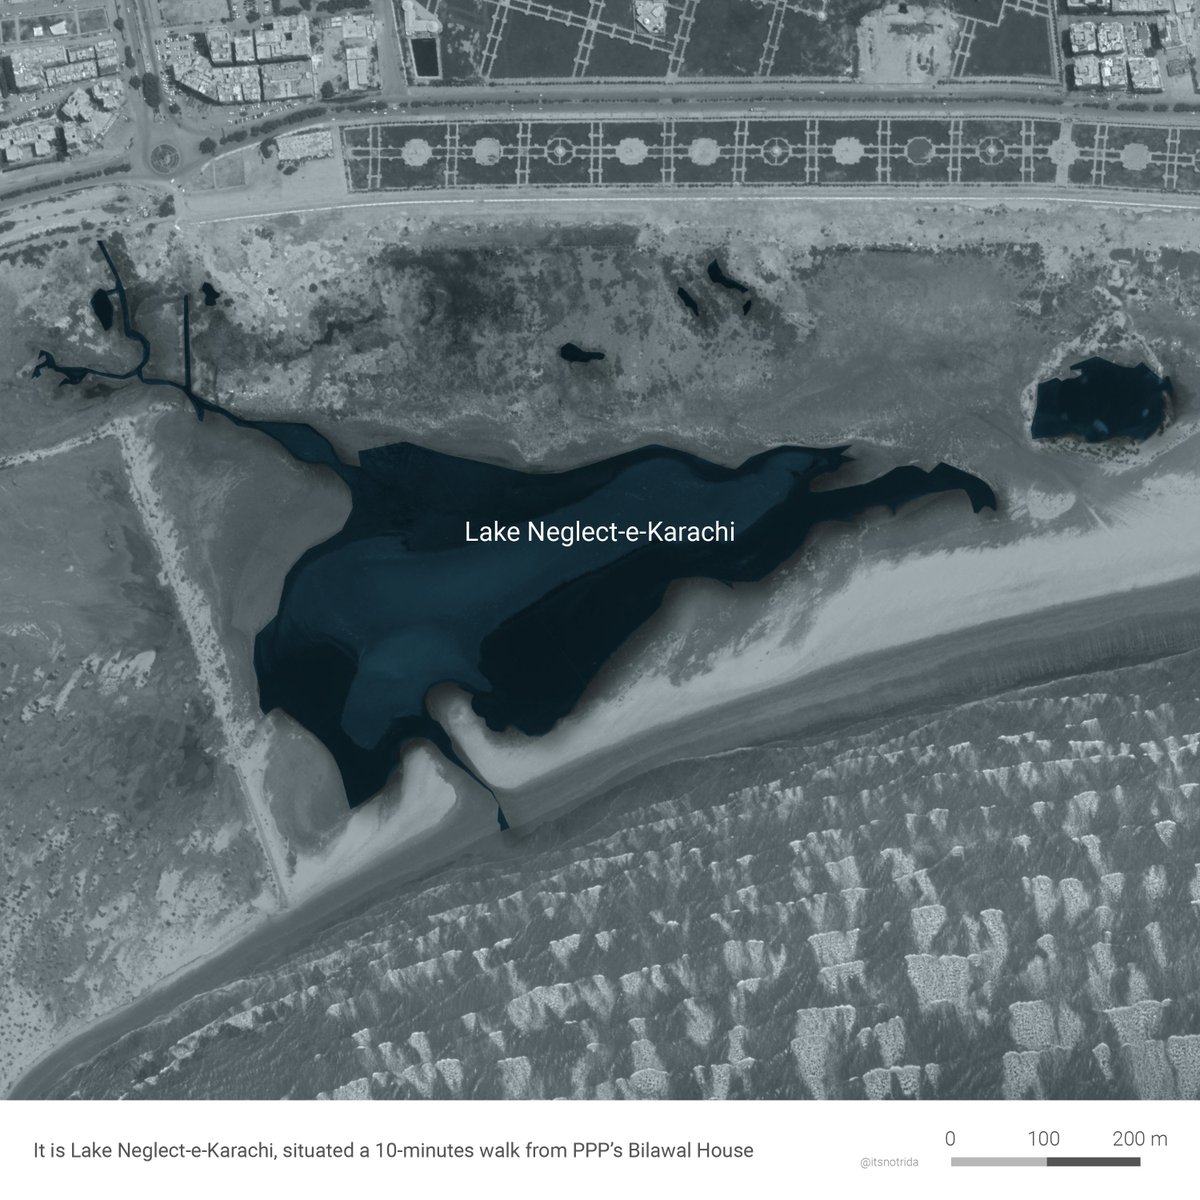 It is Lake Neglect-e-Karachi, an unapologetic sewage outfall on the city's most accessible public beach- "ghareebon ka sahil"- situated a short 10-minutes walk from Bilawal House. A casual fact.Don't go here to access nature at the sea, it is hazardous.2/9